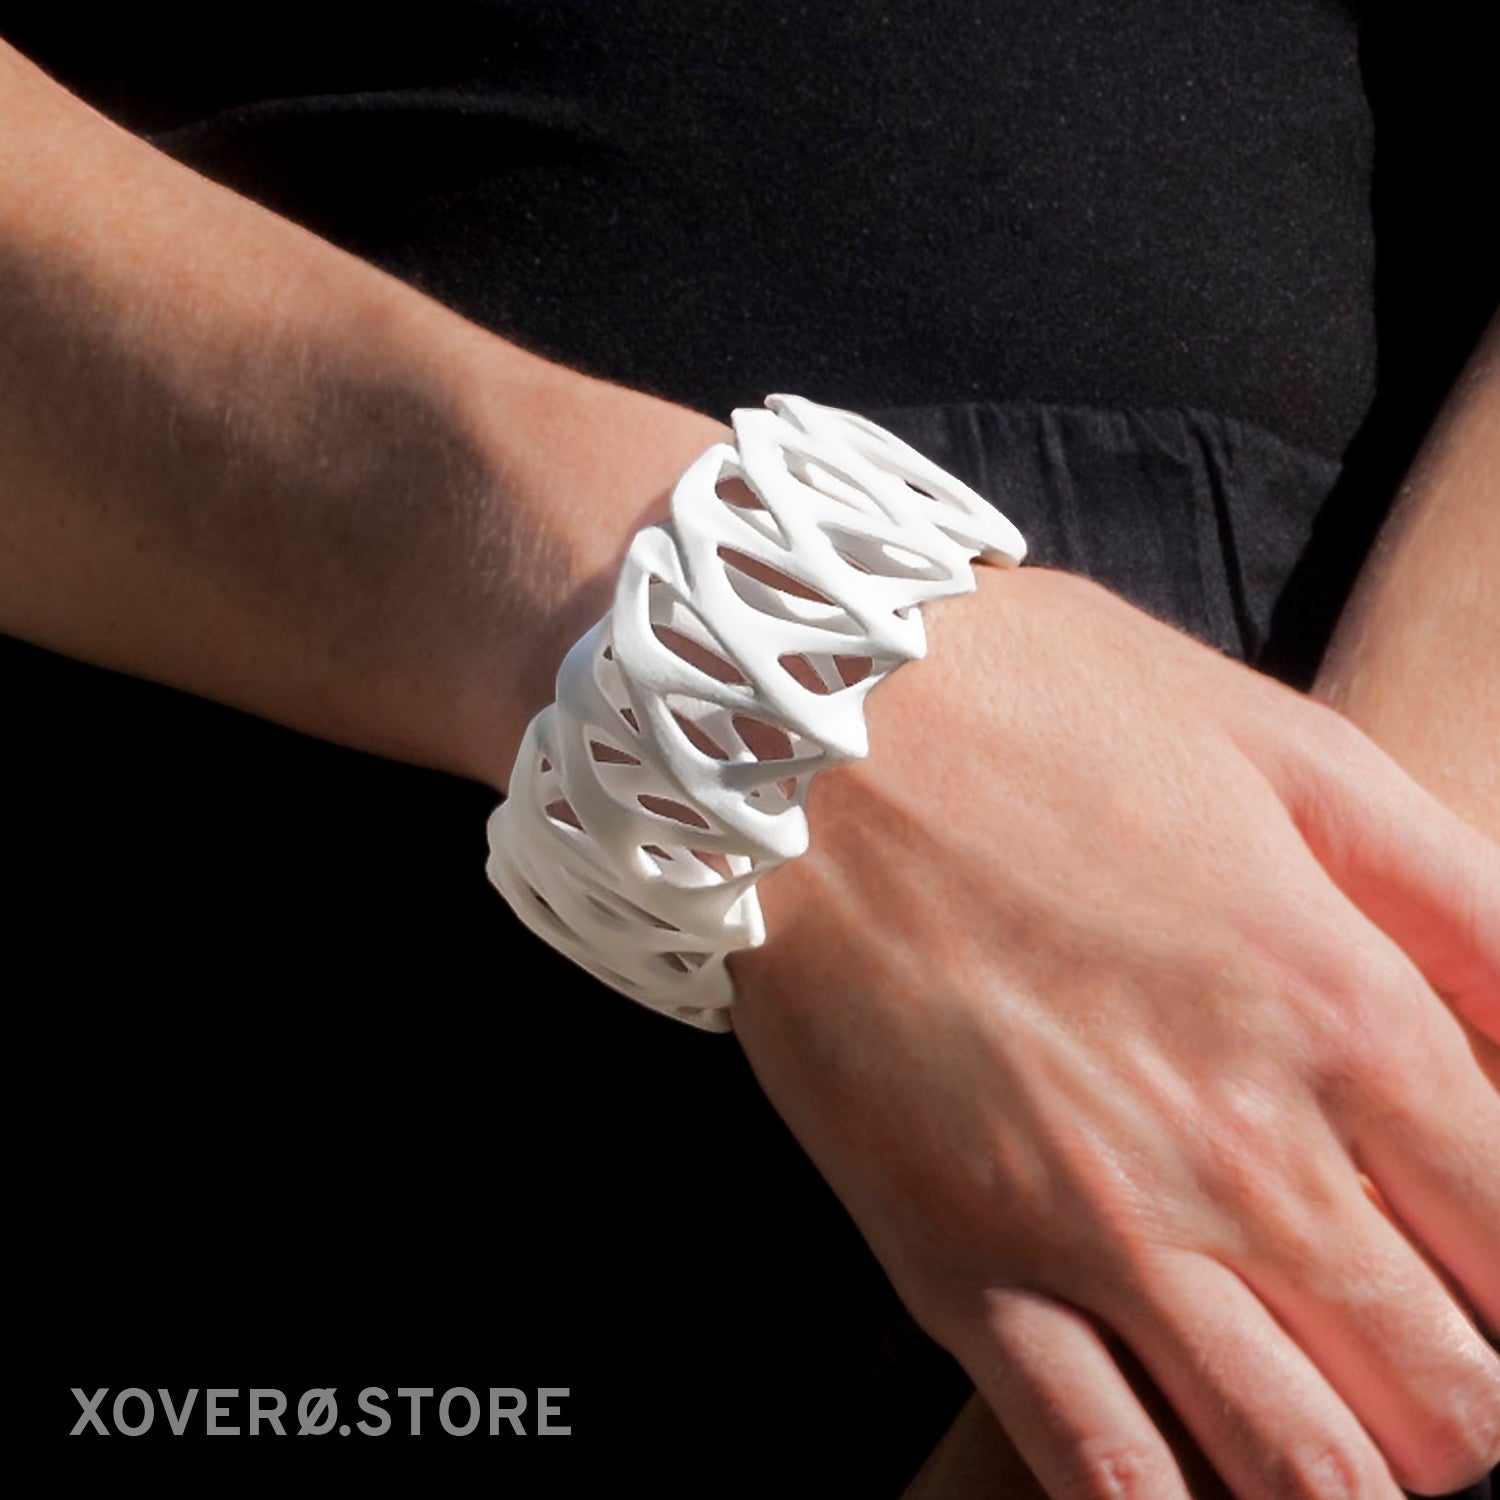 The 3D-Printed Bharata Bracelet Is Inspired by Ethnic + Tribal Art